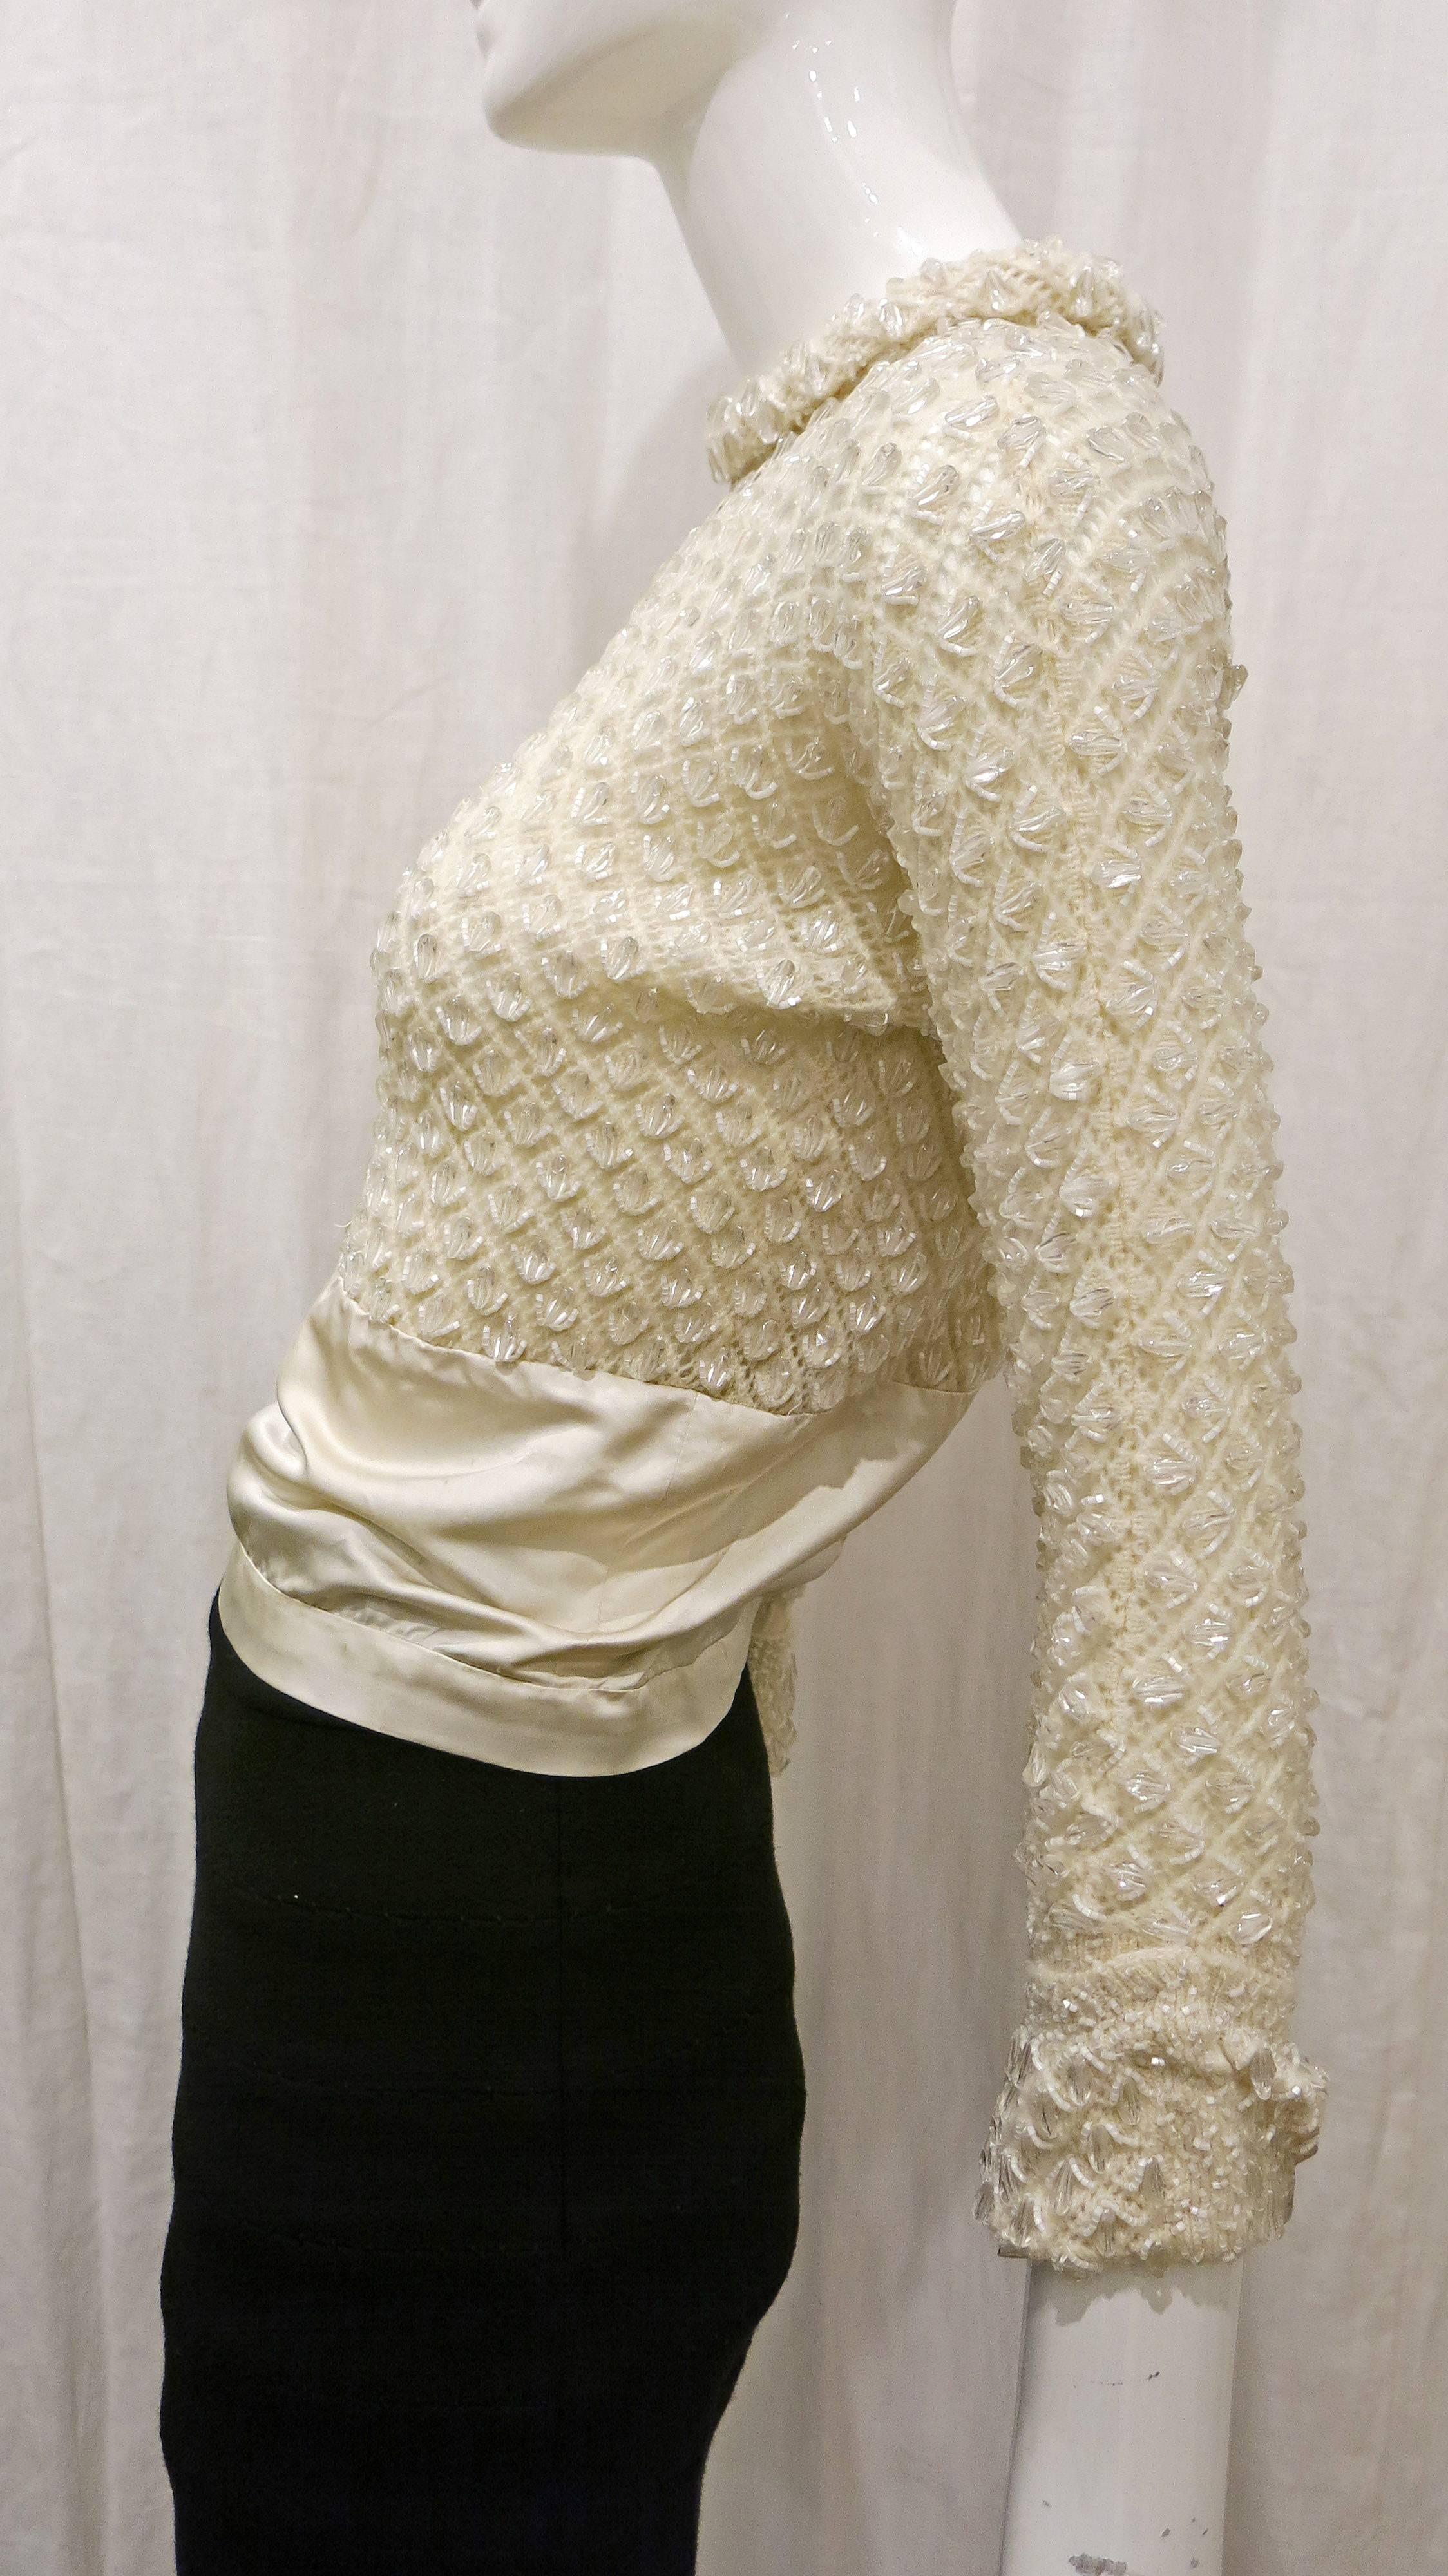 1960's Cream colored knit sweater with allover beaded detail. Rolled collar and cuffed sleeves. Silk on lower half of torso as well as inside of cuffs. Eyelet. Zips down back of garment. No tags, most likely homemade. 